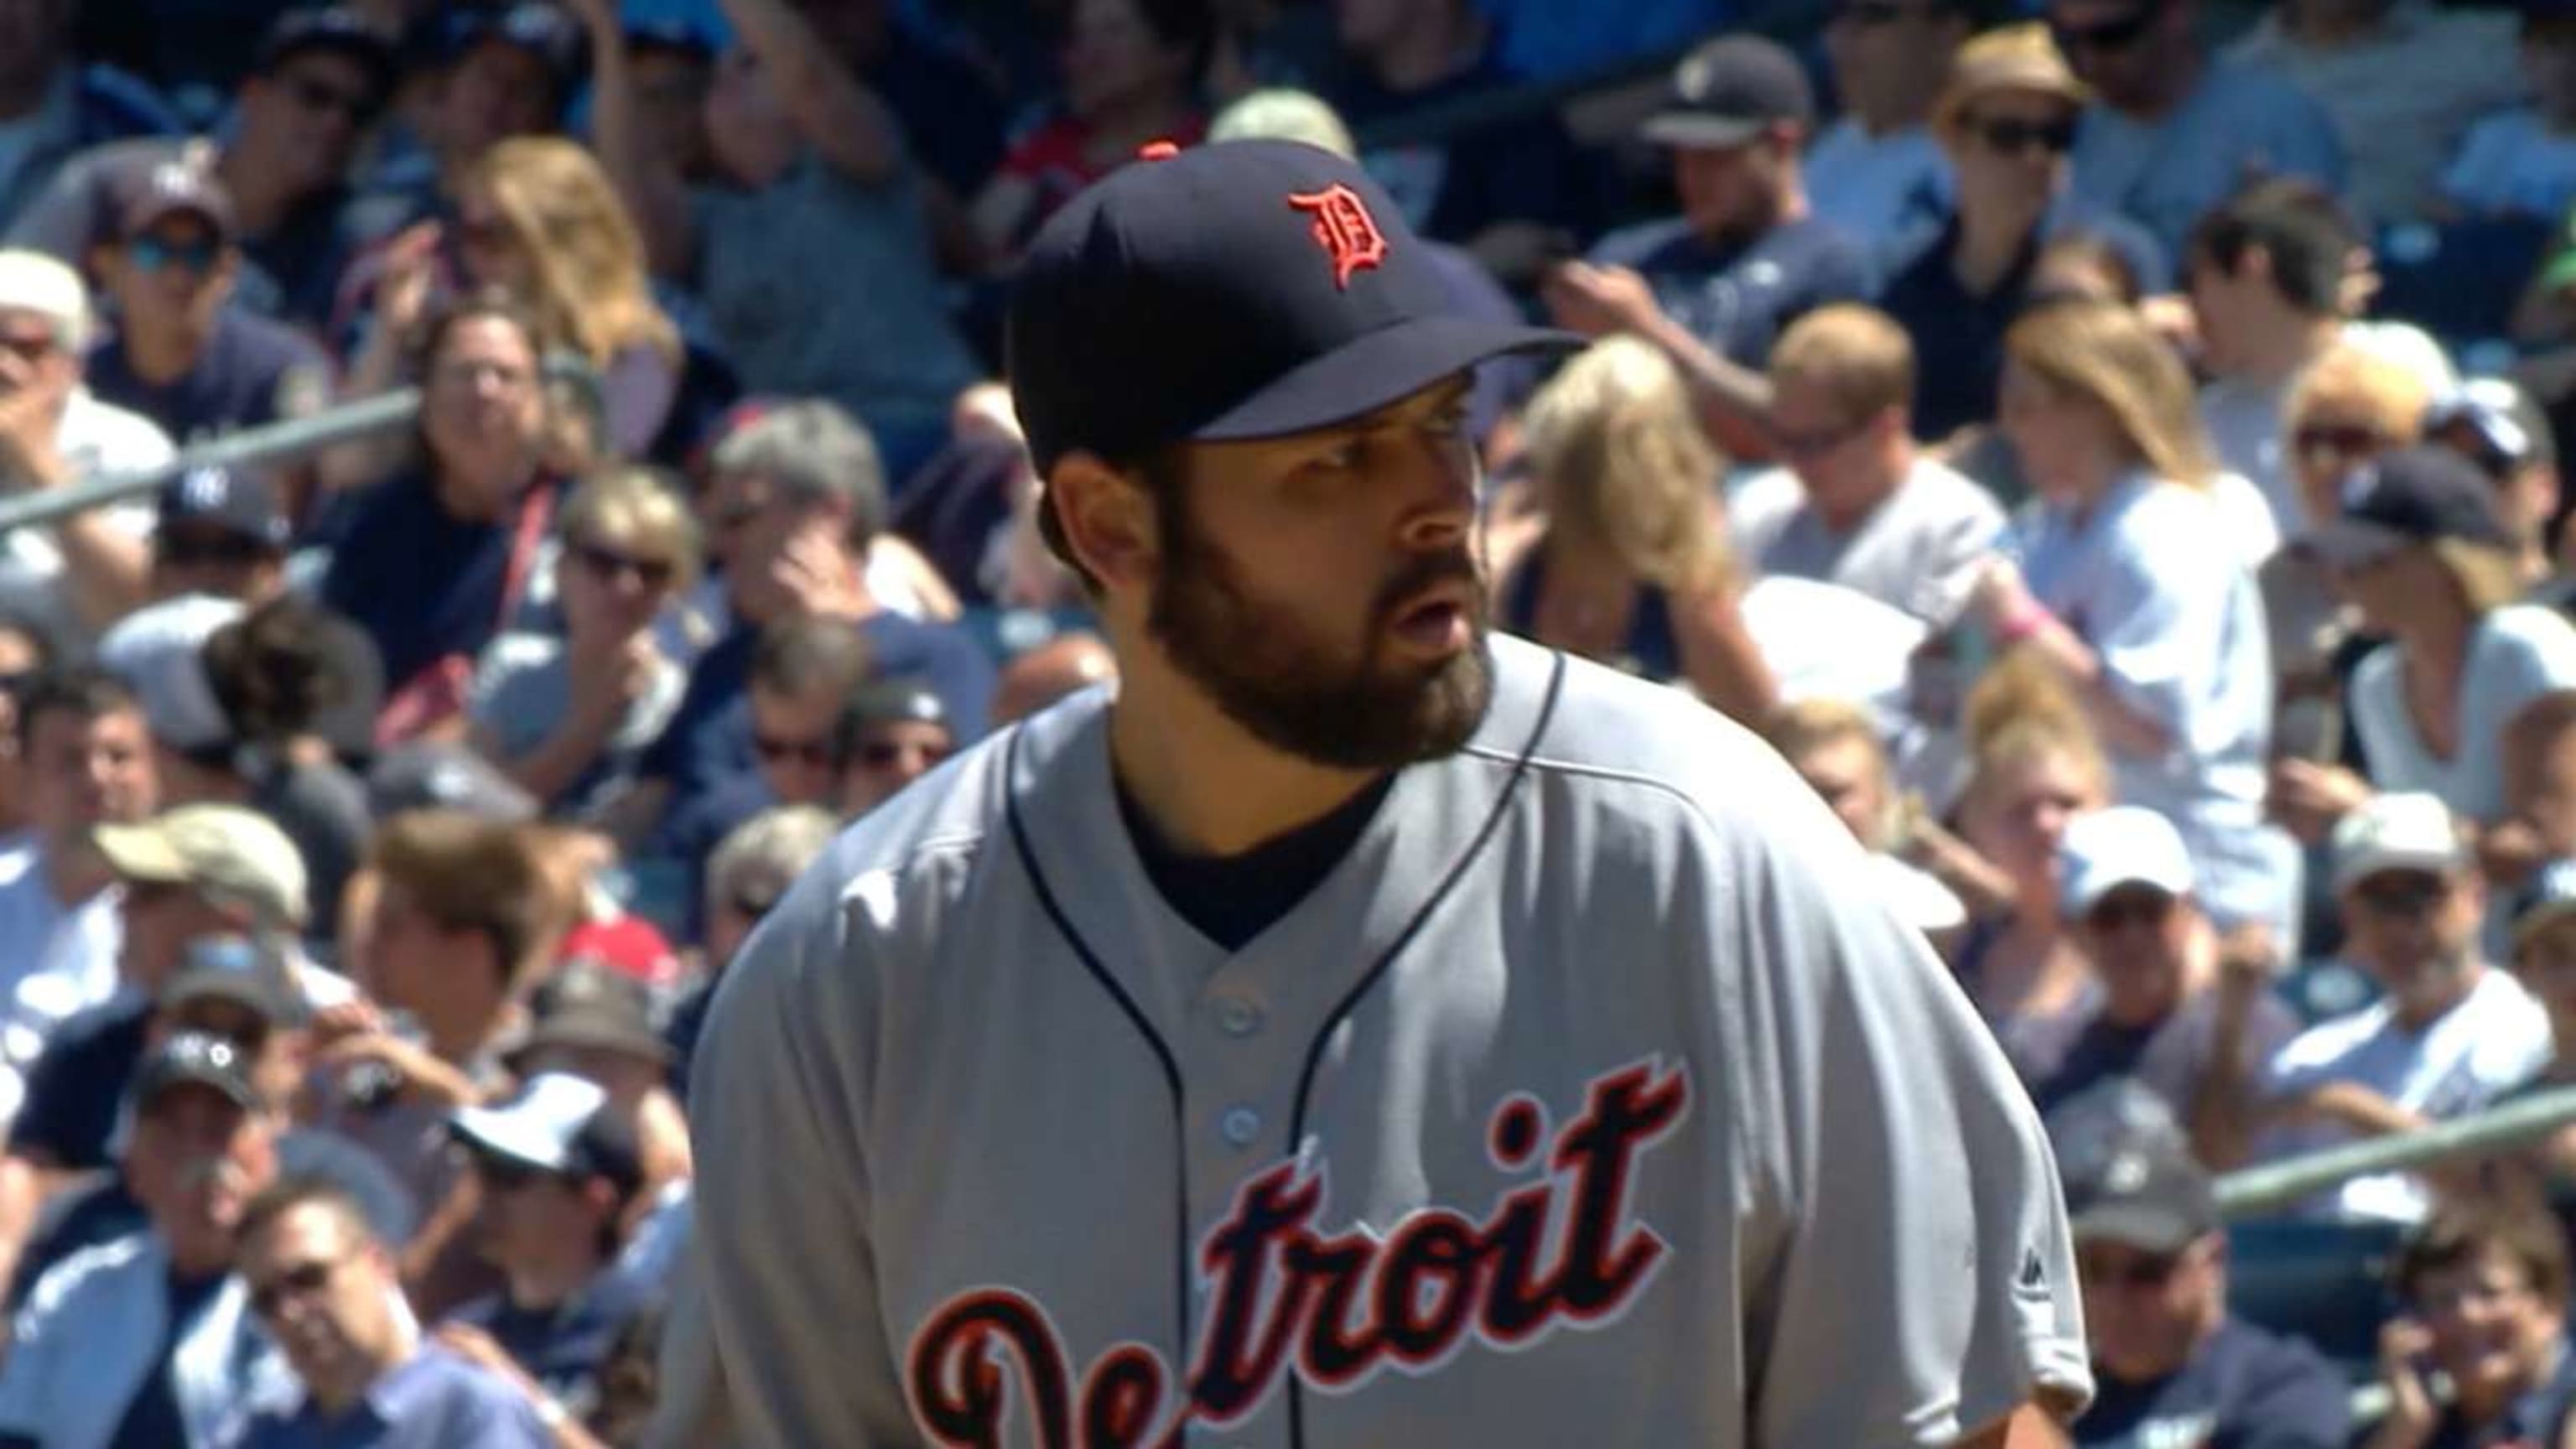 Michael Fulmer could be 1st rookie to win ERA title since Mark